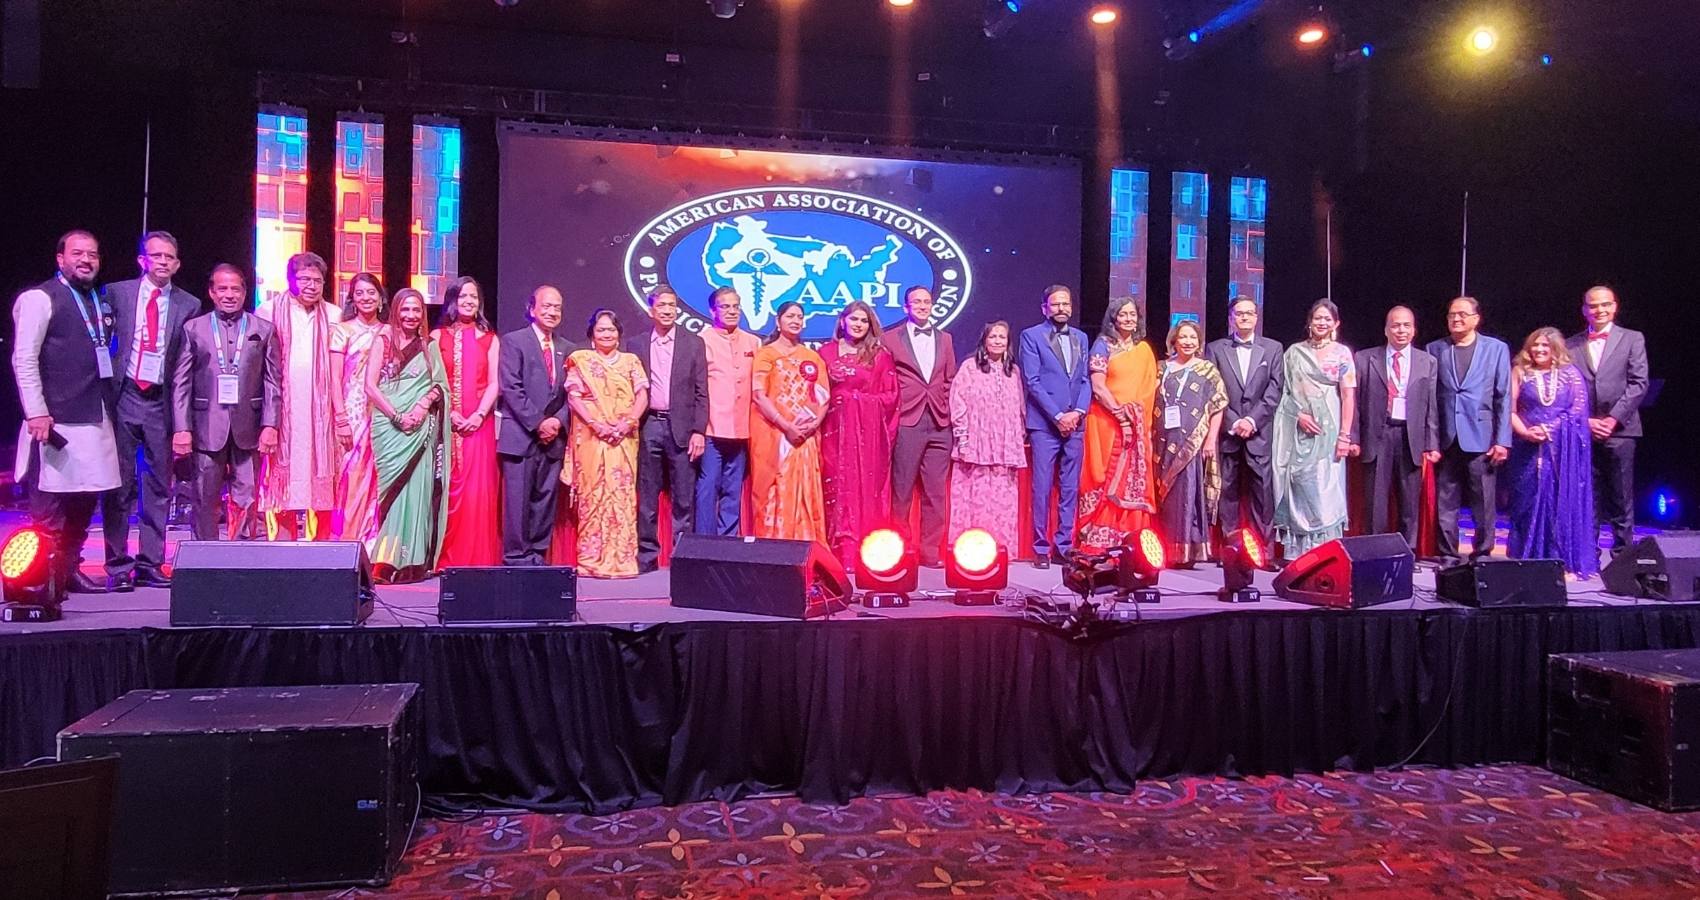 Focusing On ‘Heal The Healers,’ AAPI’s Historic 40th Convention Concludes In San Antonio